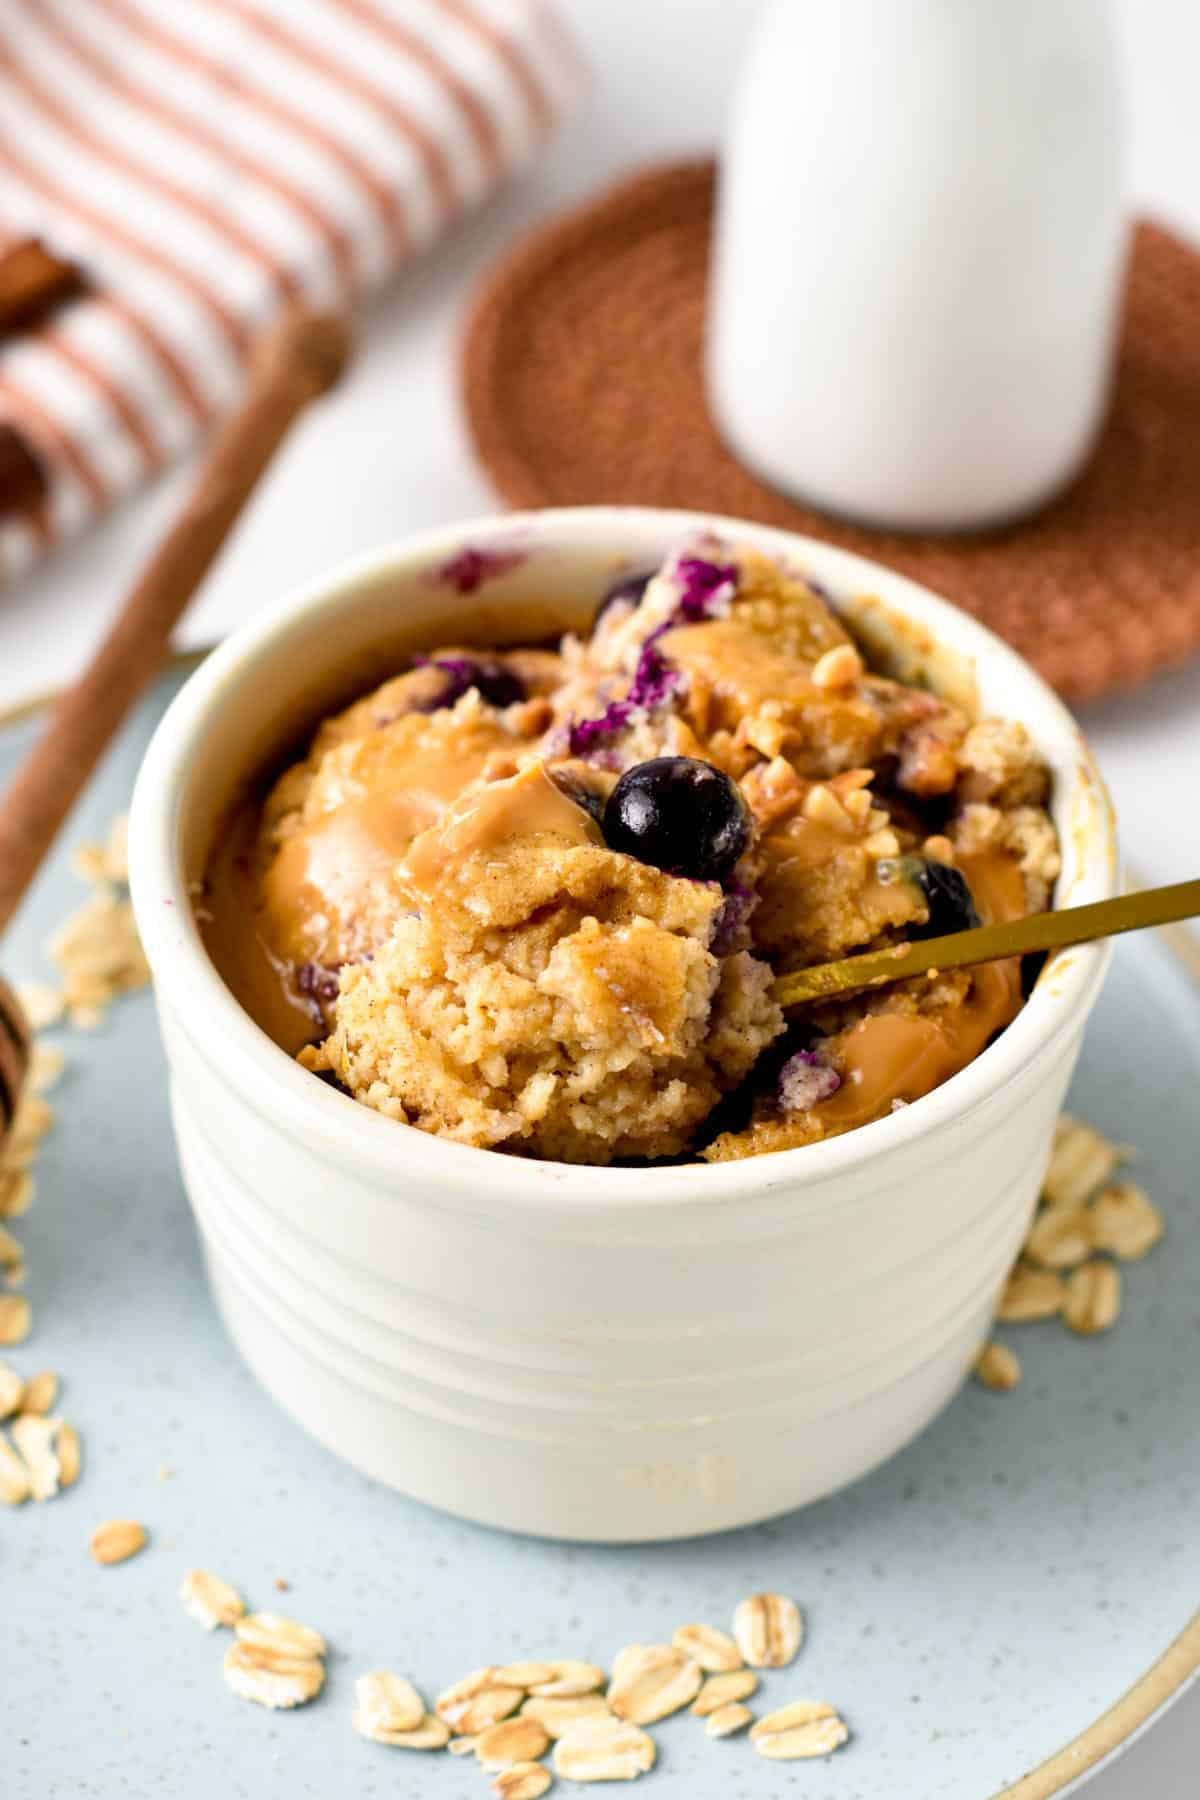 This blended baked oats recipe is an easy, healthy single serve breakfast that truly taste like dessert but packed with 15 g proteins serve. If you are after an healthy breakfast that keep you energized and full until lunchtime, that's the one to try.